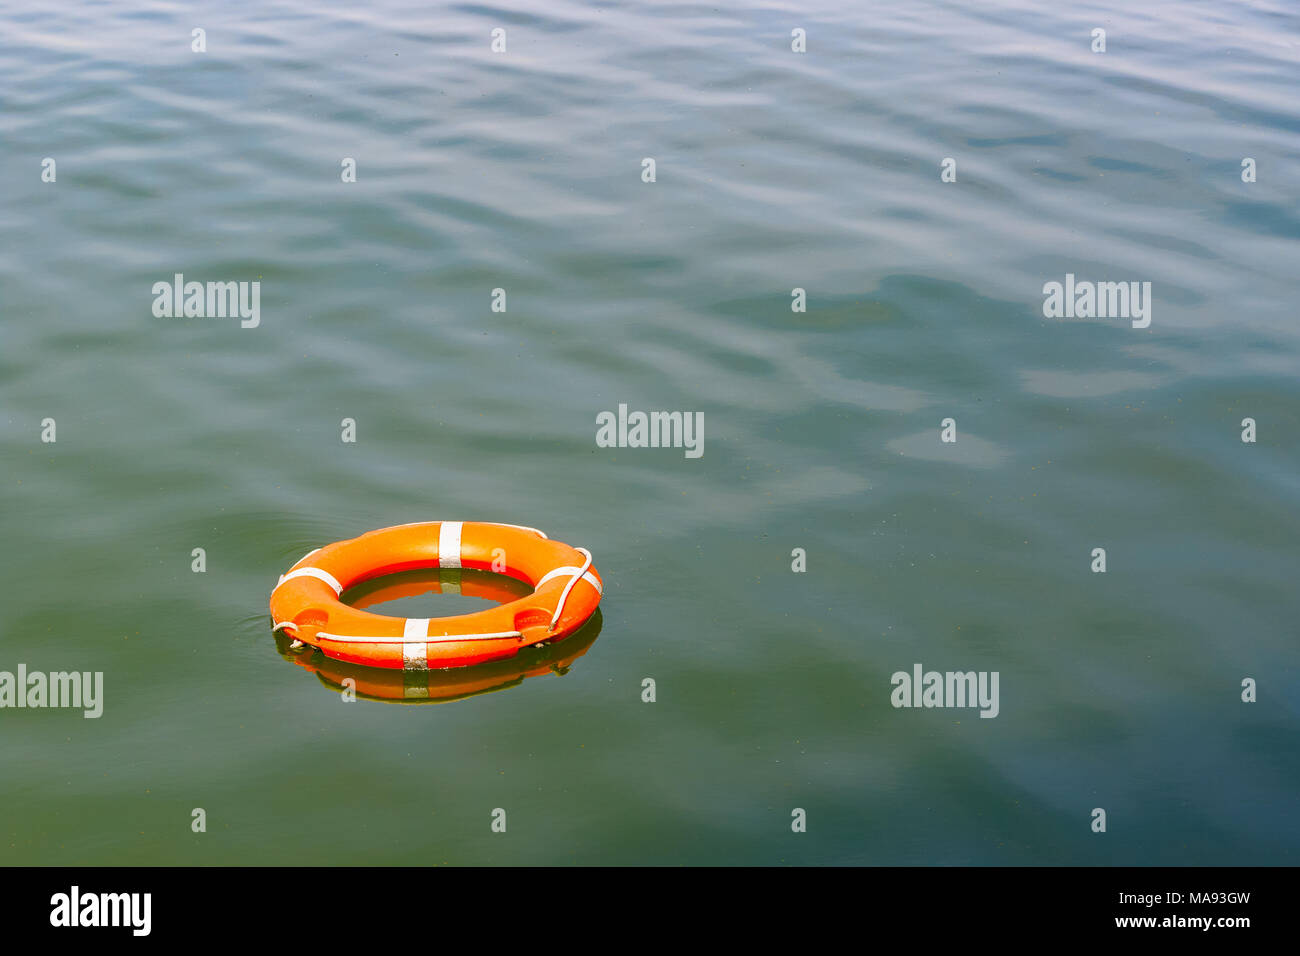 A lifebuoy floating on water for concept use Stock Photo